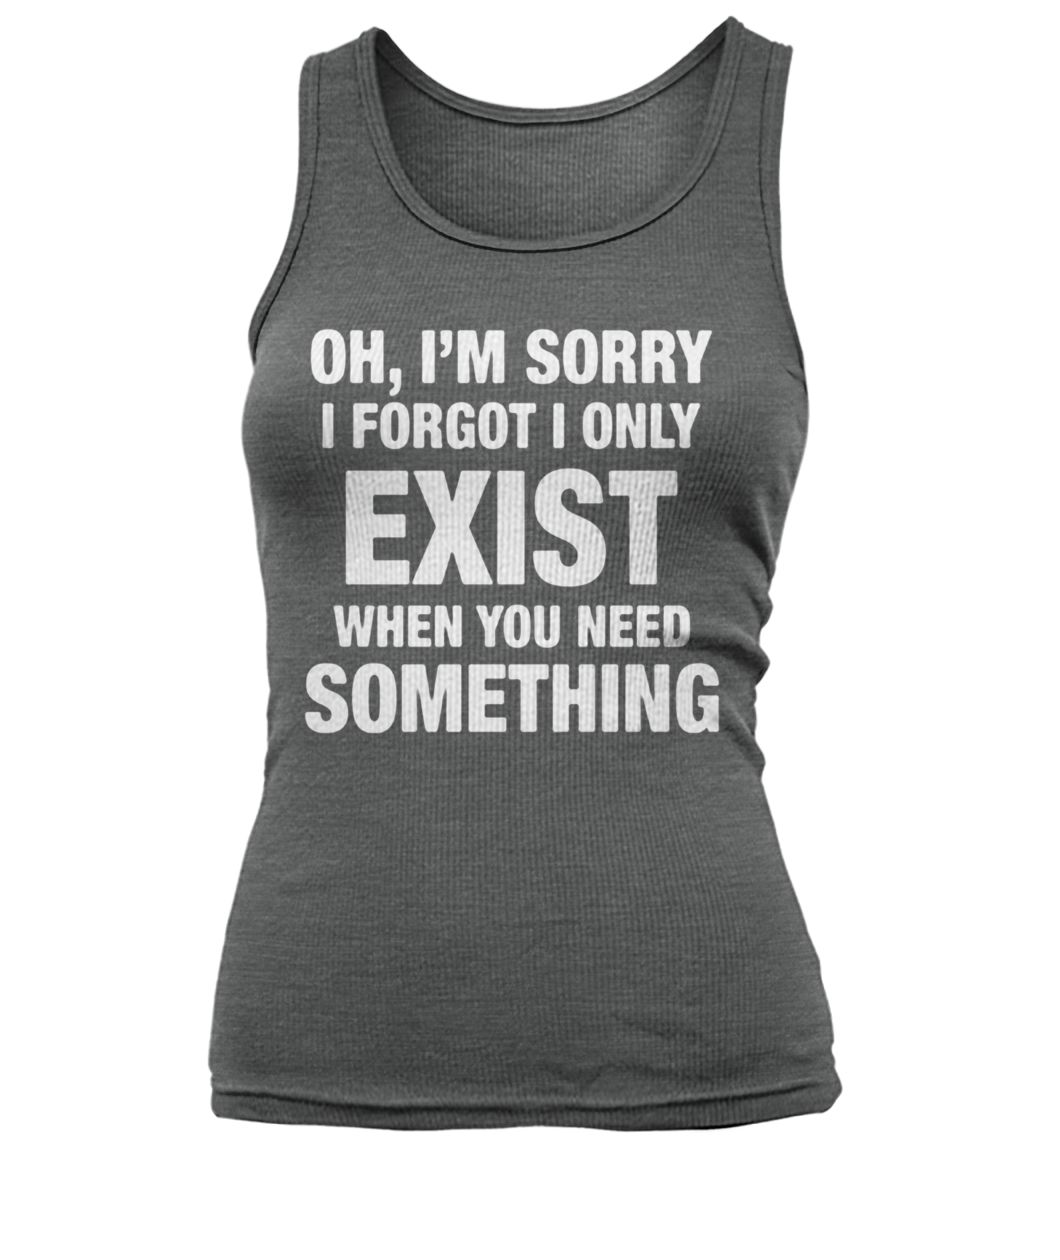 Oh I'm sorry I forgot I only exist when you need something women's tank top